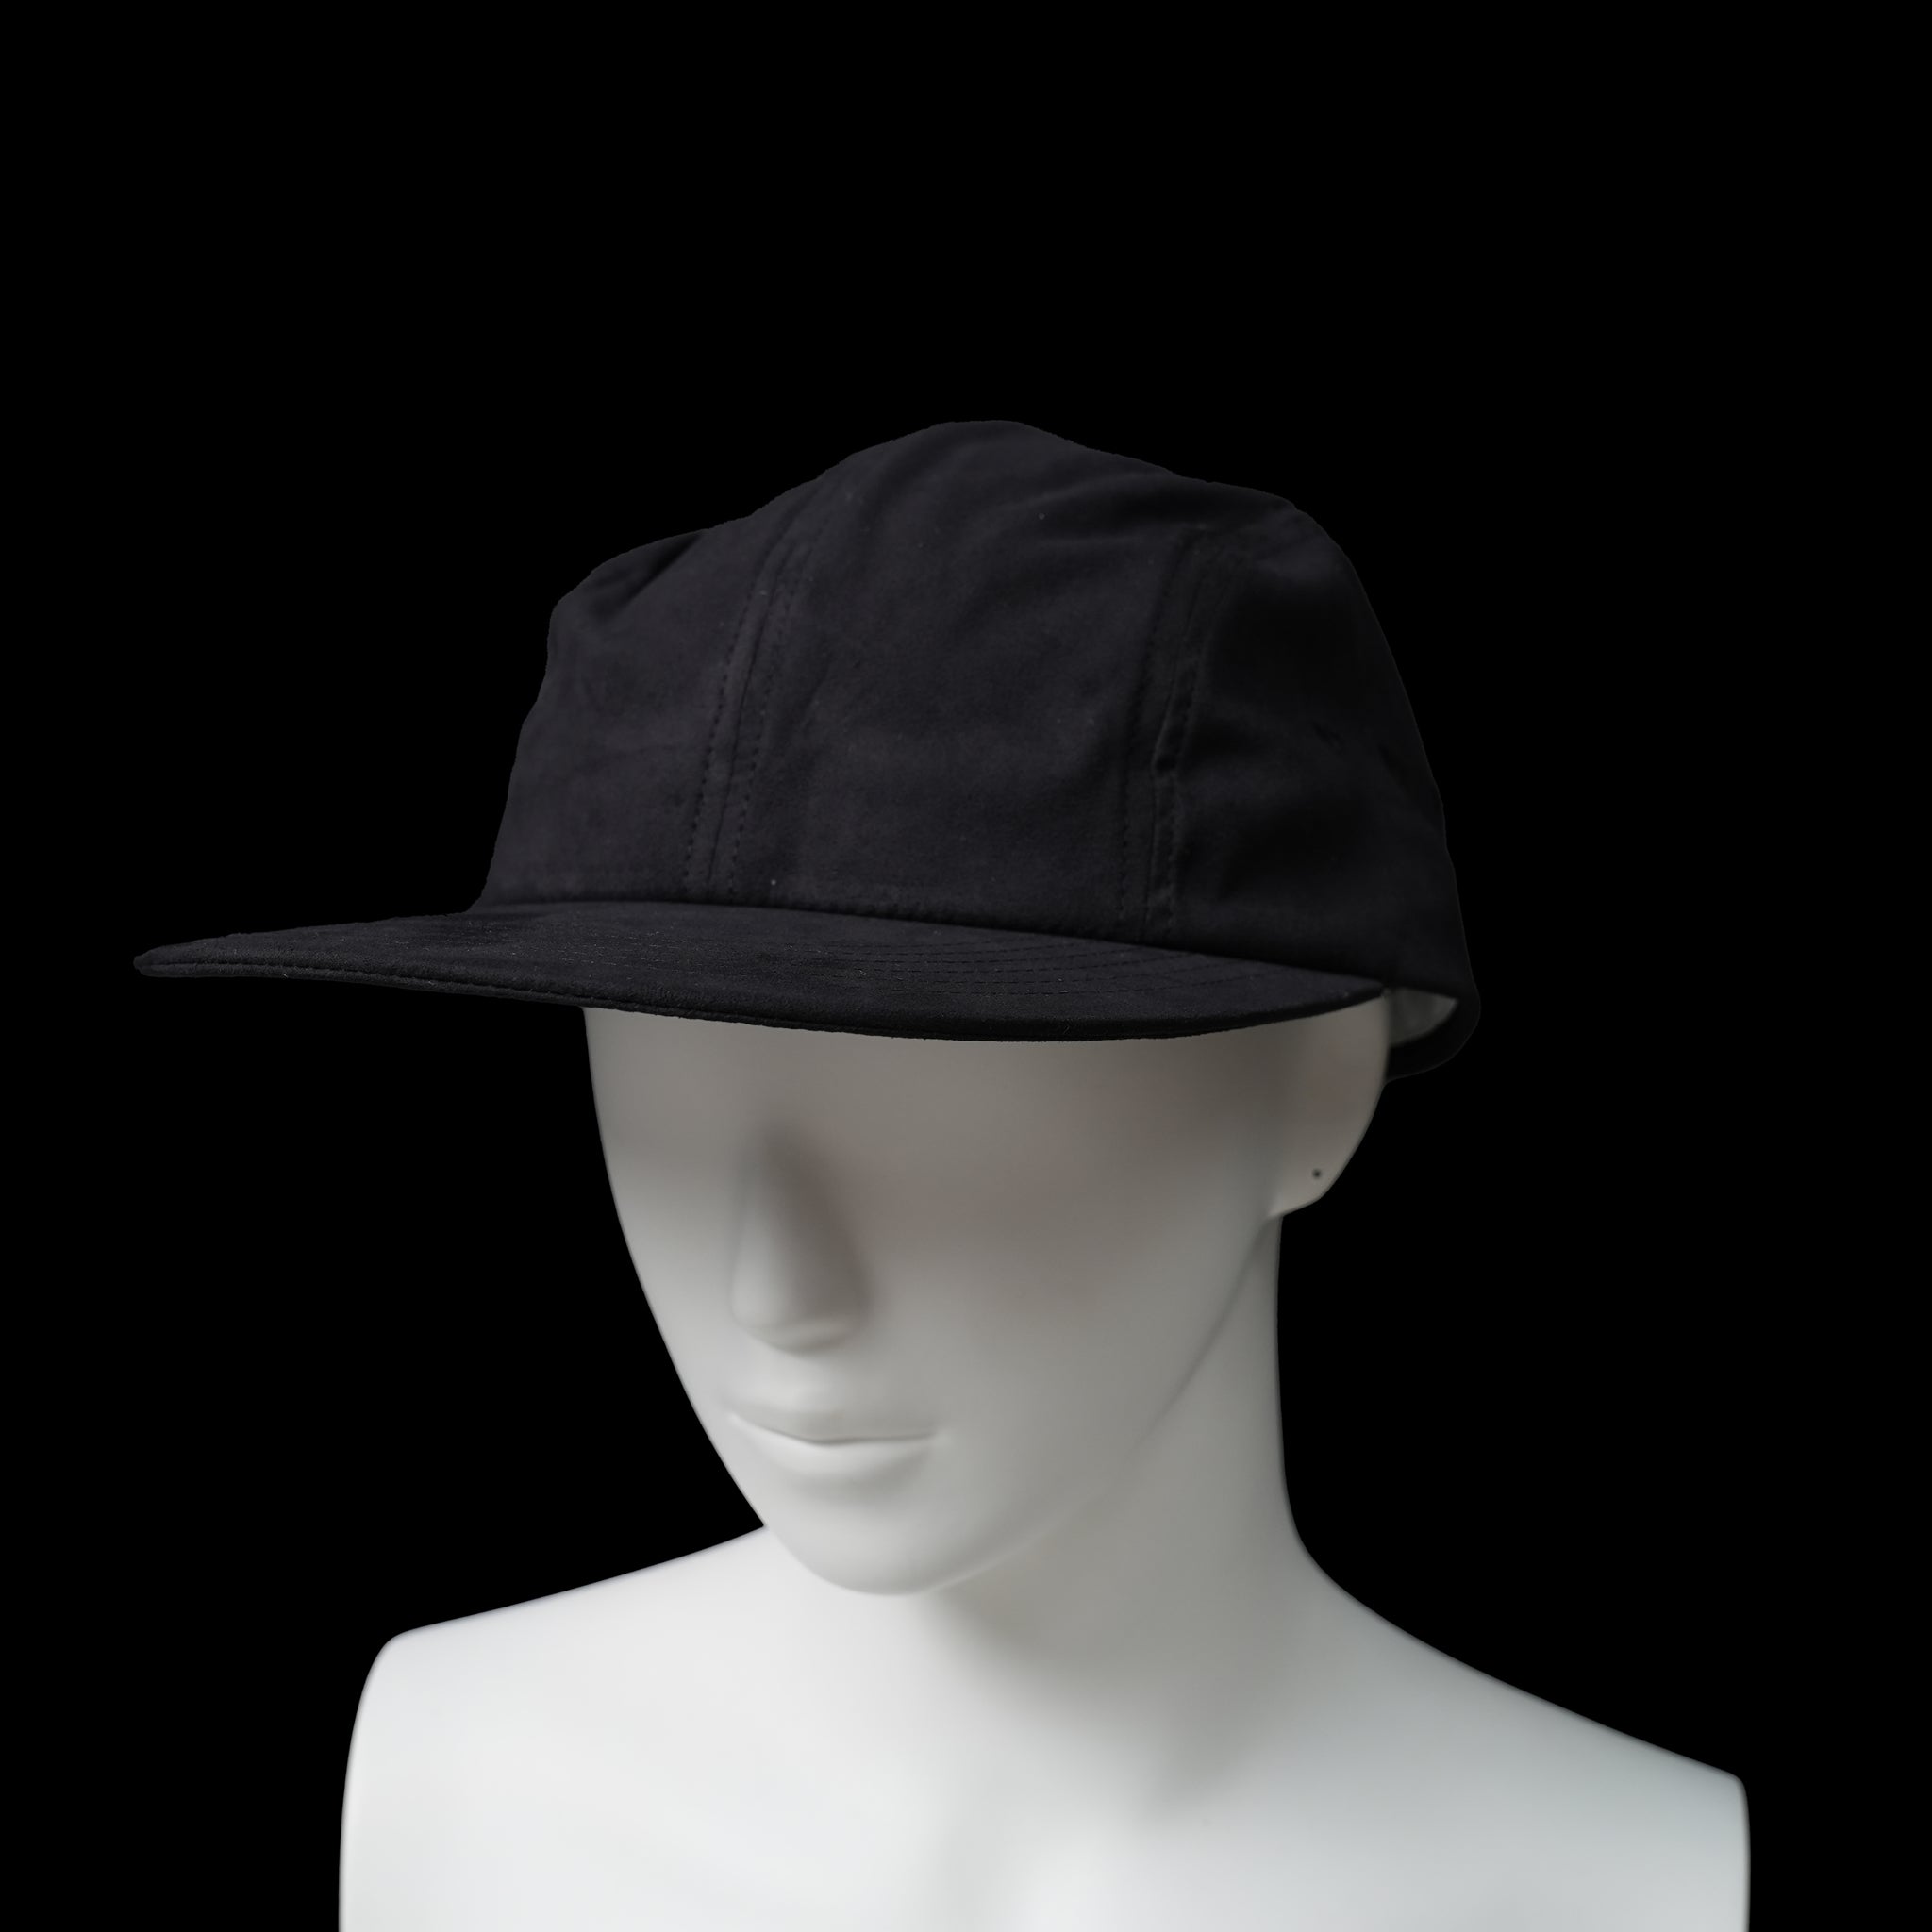 No:UN-023_AW23 | Name:UNTRACE x IDSL EASY TIME 4 PANEL CAP_MICRO SUEDE